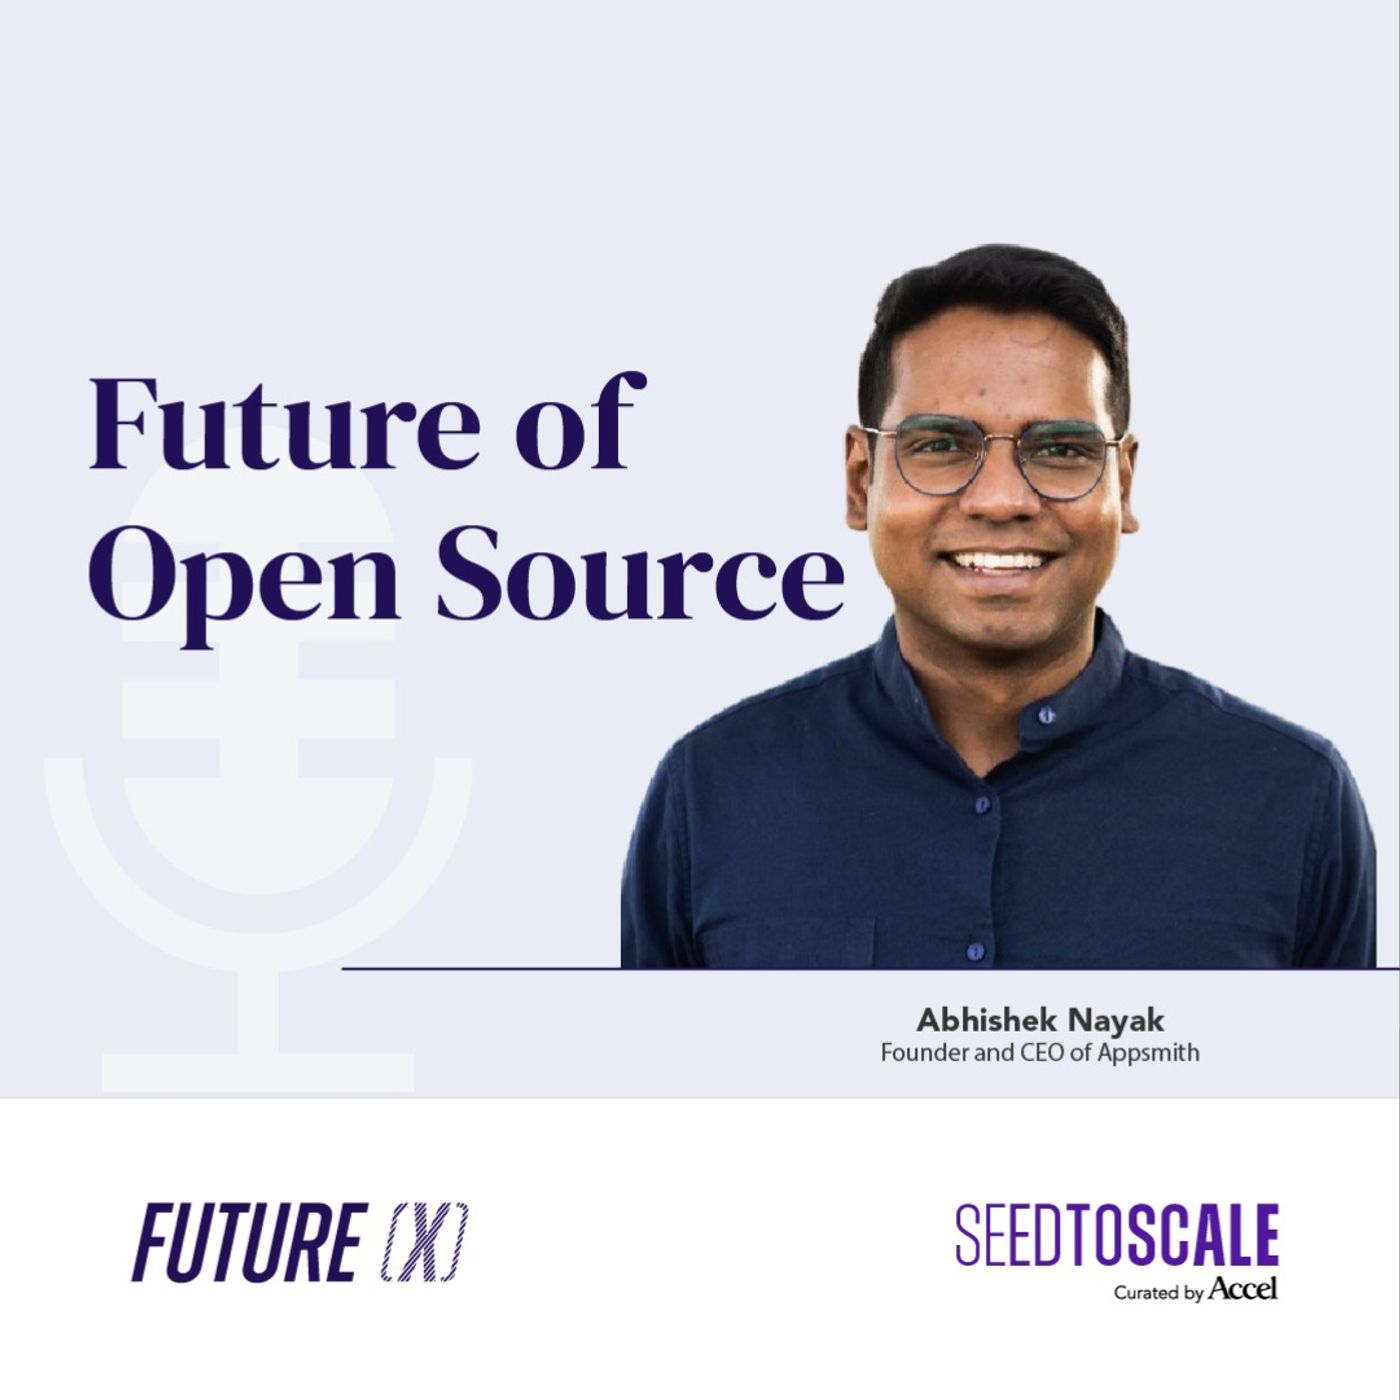 INSIGHTS #74: Future of Open Source | Abhishek Nayak on Appsmith and Building Open Source Projects